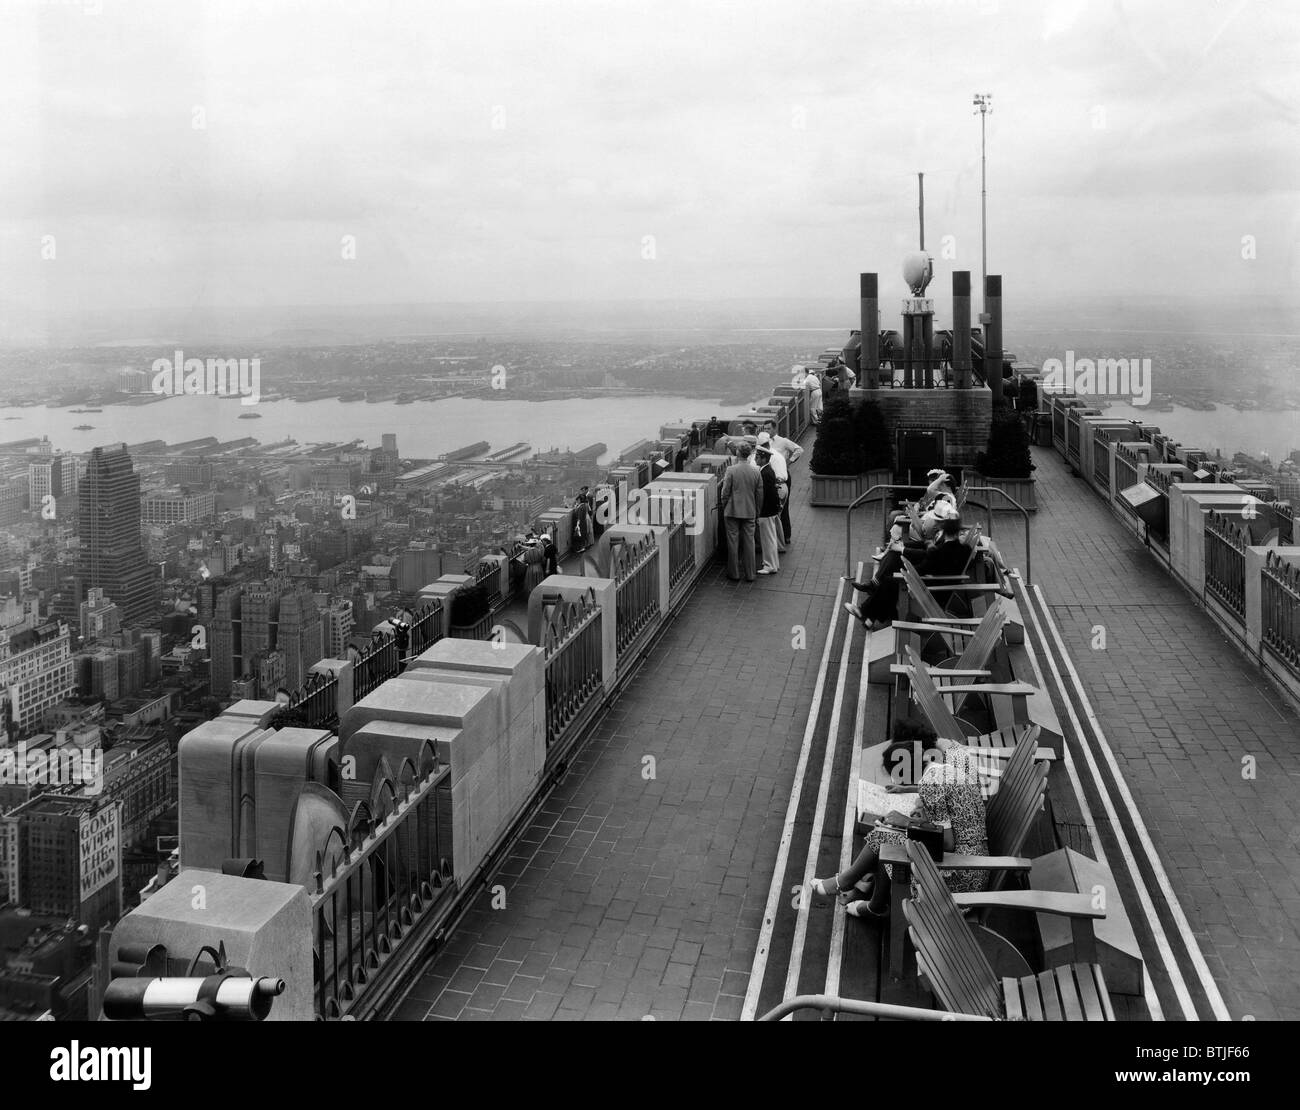 View from the 70 story RCA building in Rockefeller Center, New York City, circa 1946.  CSU Archives/Courtesy Everett Collection Stock Photo